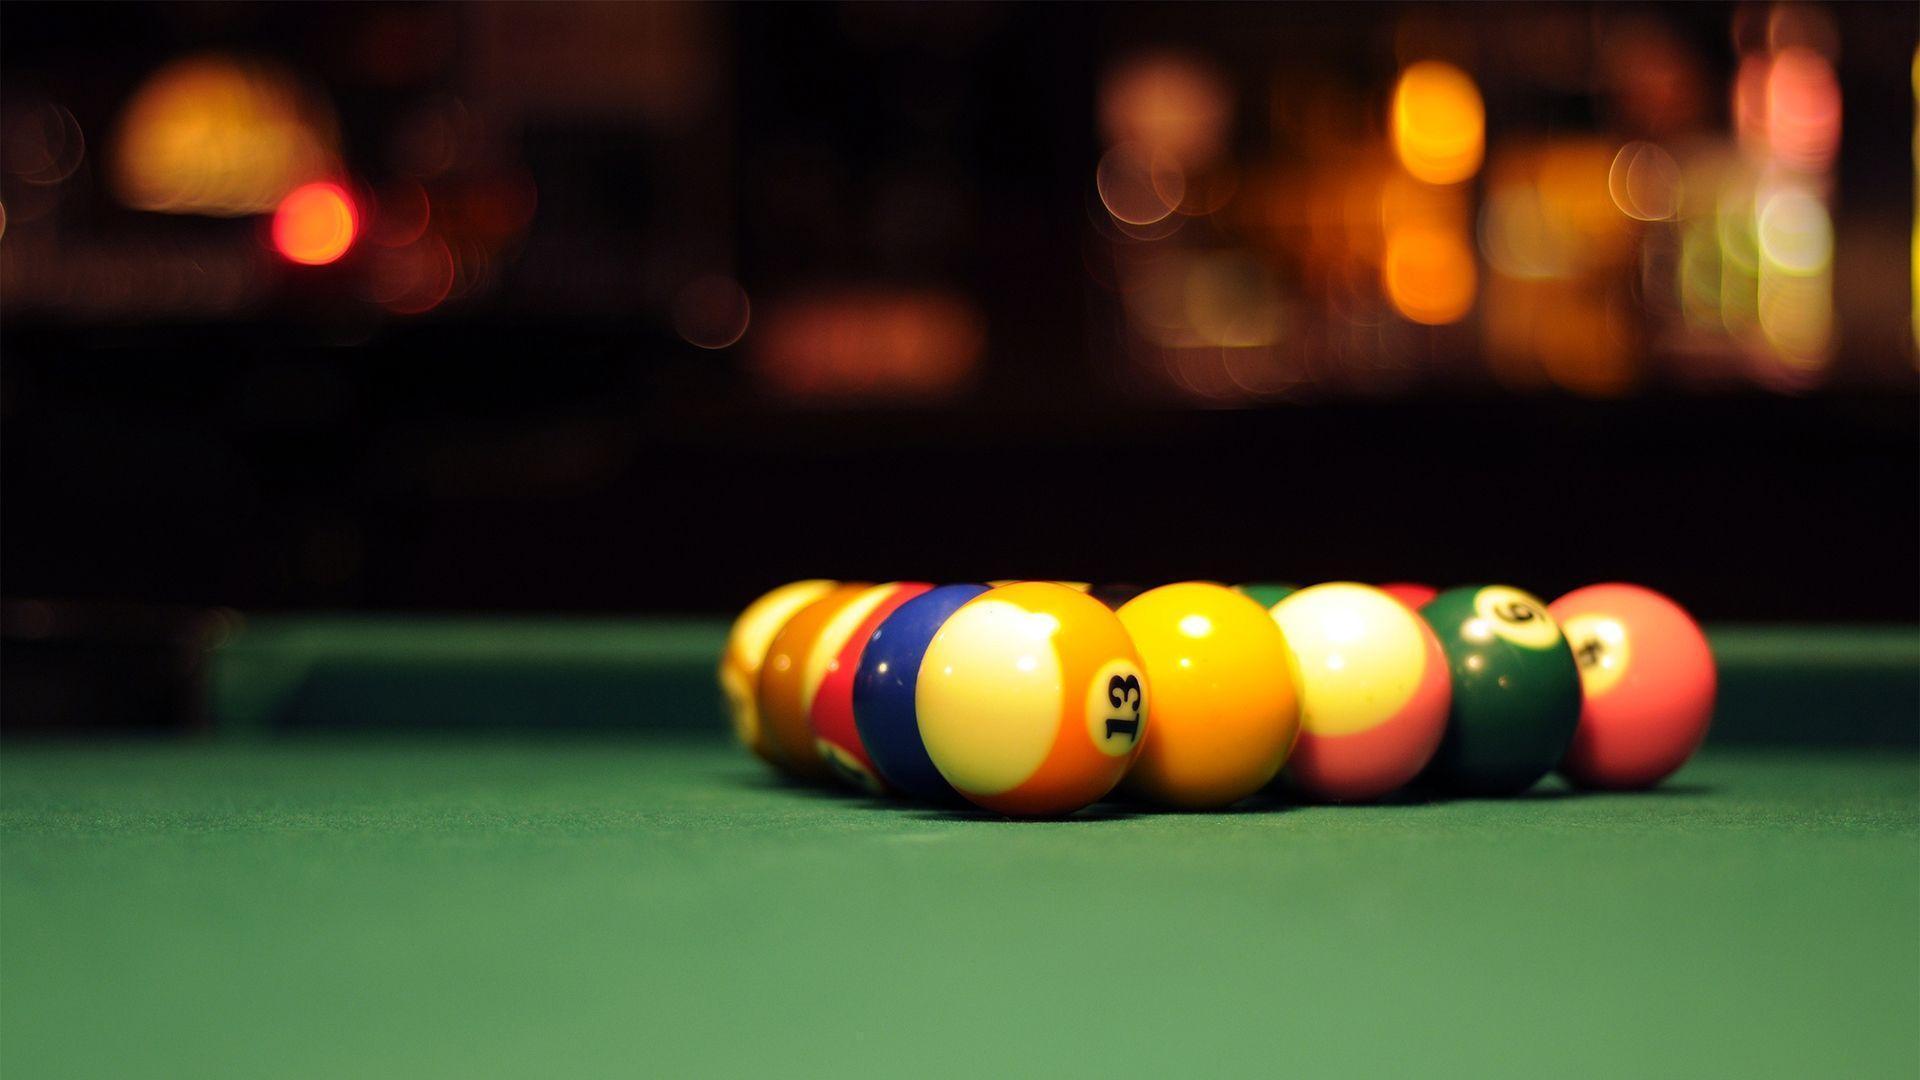 Pool Table Wallpaper Lovely Beautiful Pool Table and Snooker